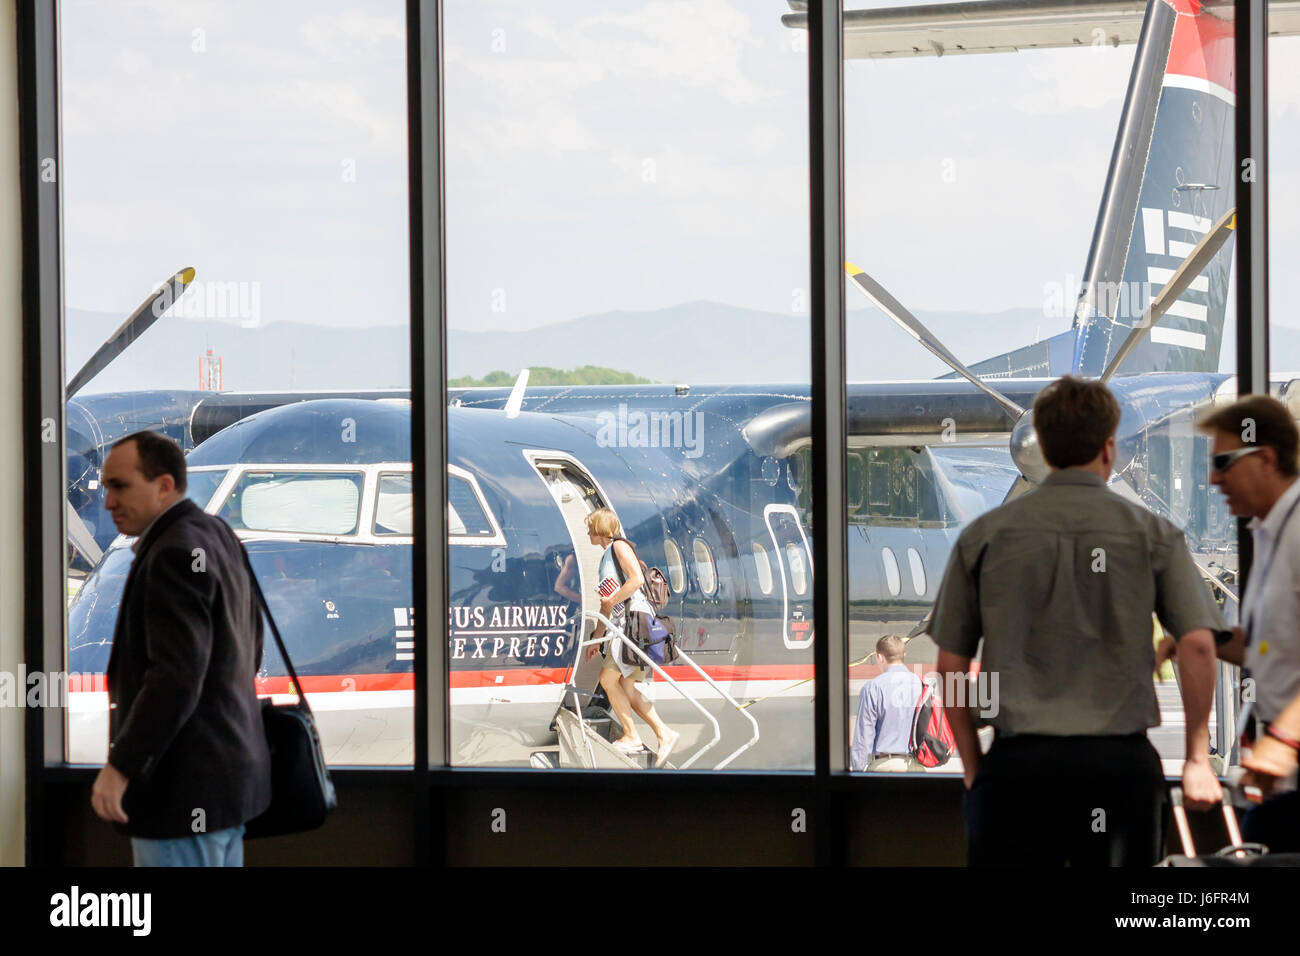 Tennessee Blountville,Tri City Airport,US Airways Express,regional airliner,plane,commuter flight,plane,adult adults woman women female lady,men,board Stock Photo